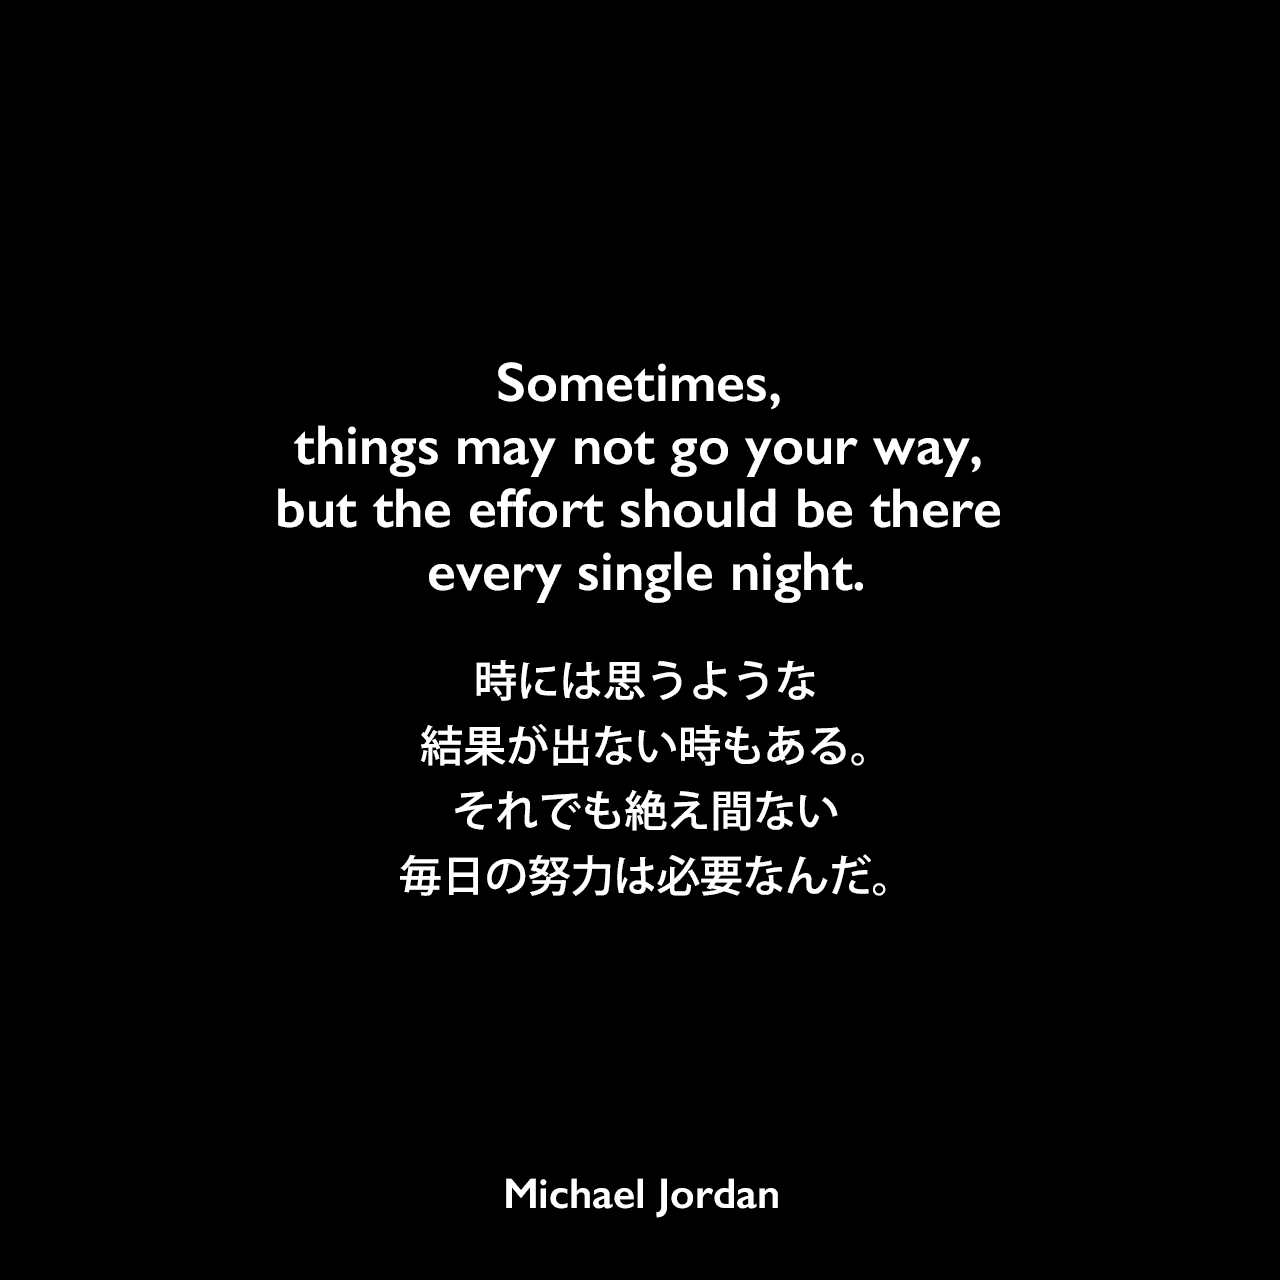 Sometimes, things may not go your way, but the effort should be there every single night.時には思うような結果が出ない時もある。それでも絶え間ない毎日の努力は必要なんだ。Michael Jordan